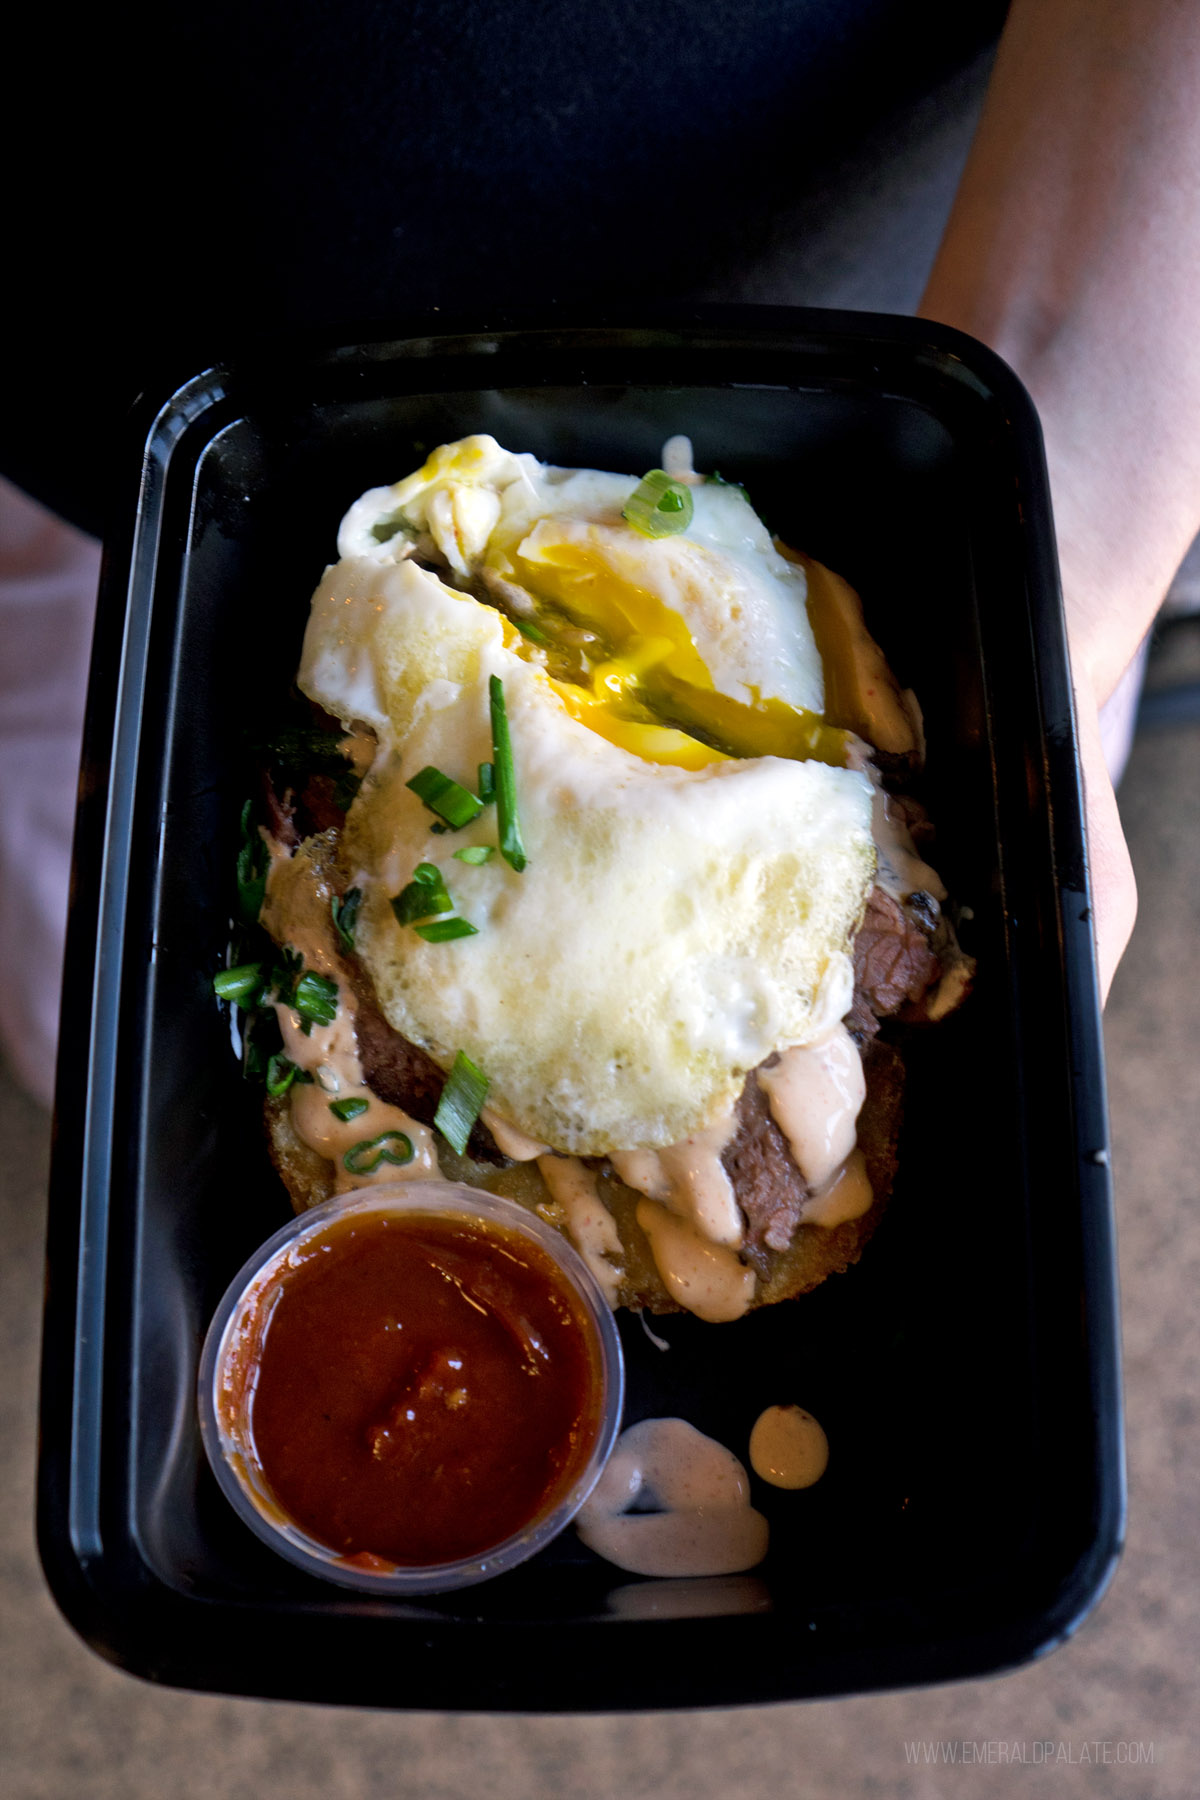 brisket in a takeout container with an egg on top